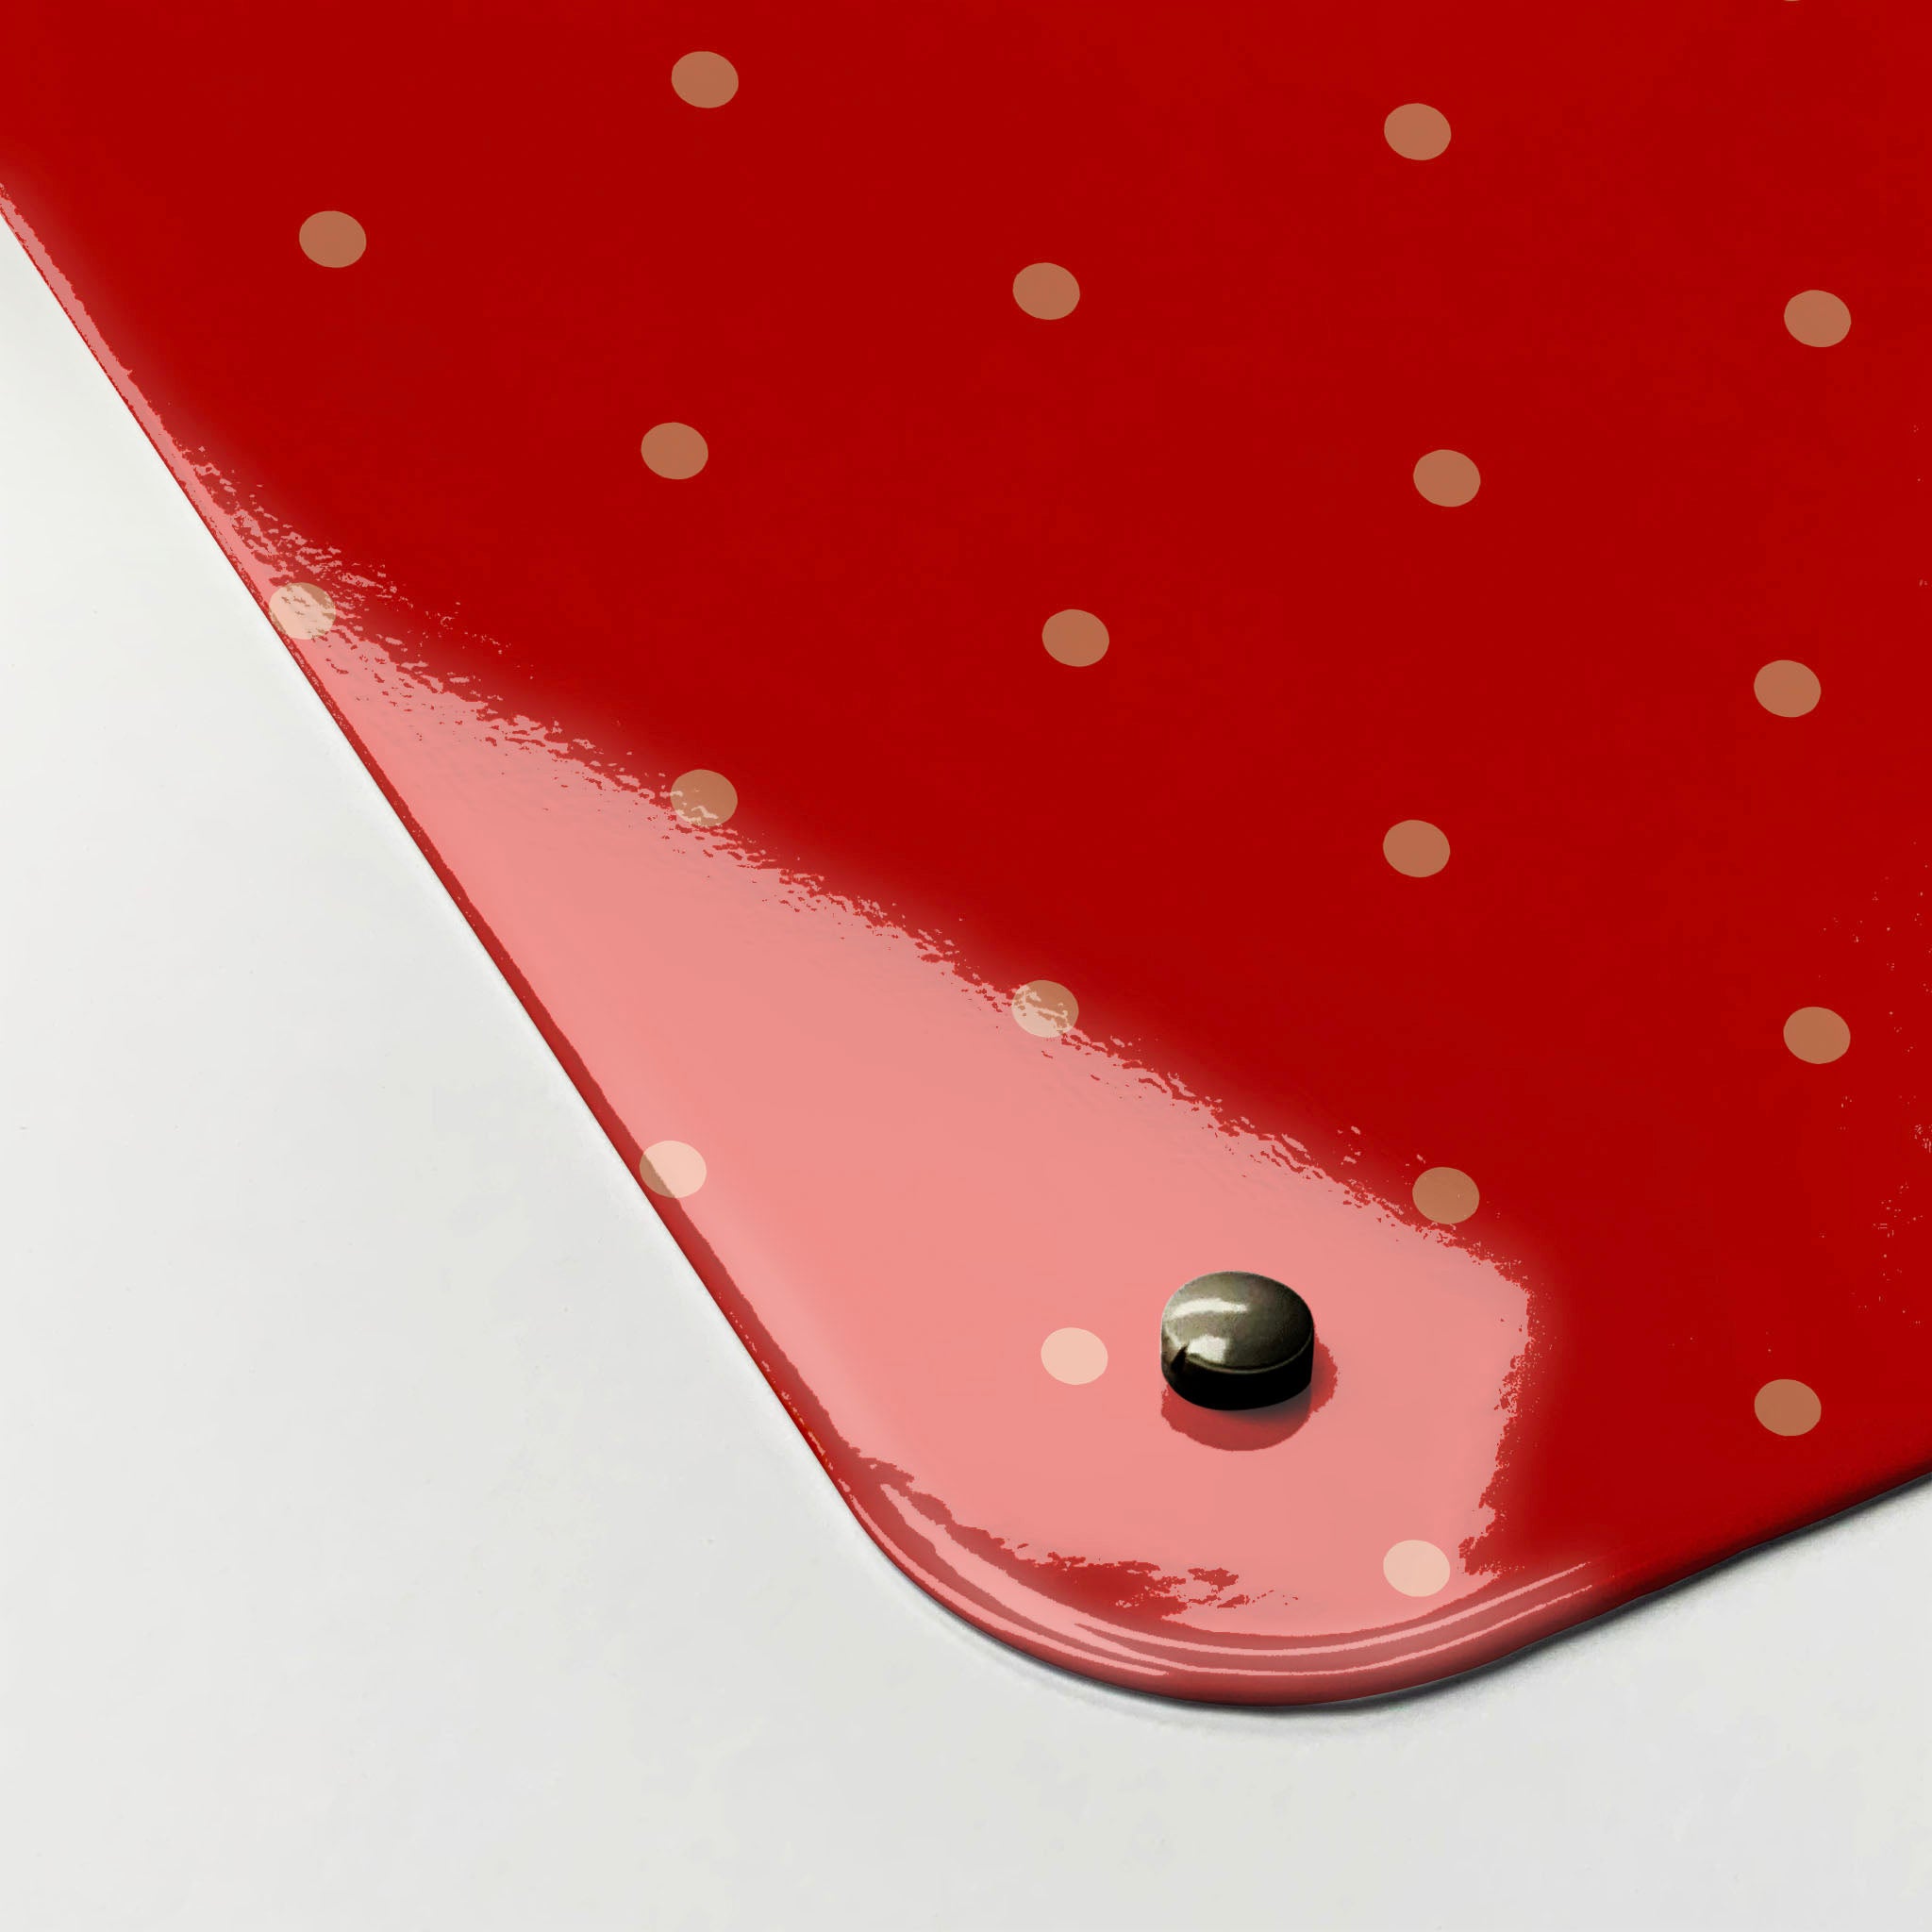 The corner detail of a polkadots on red design magnetic board to show it’s high gloss surface